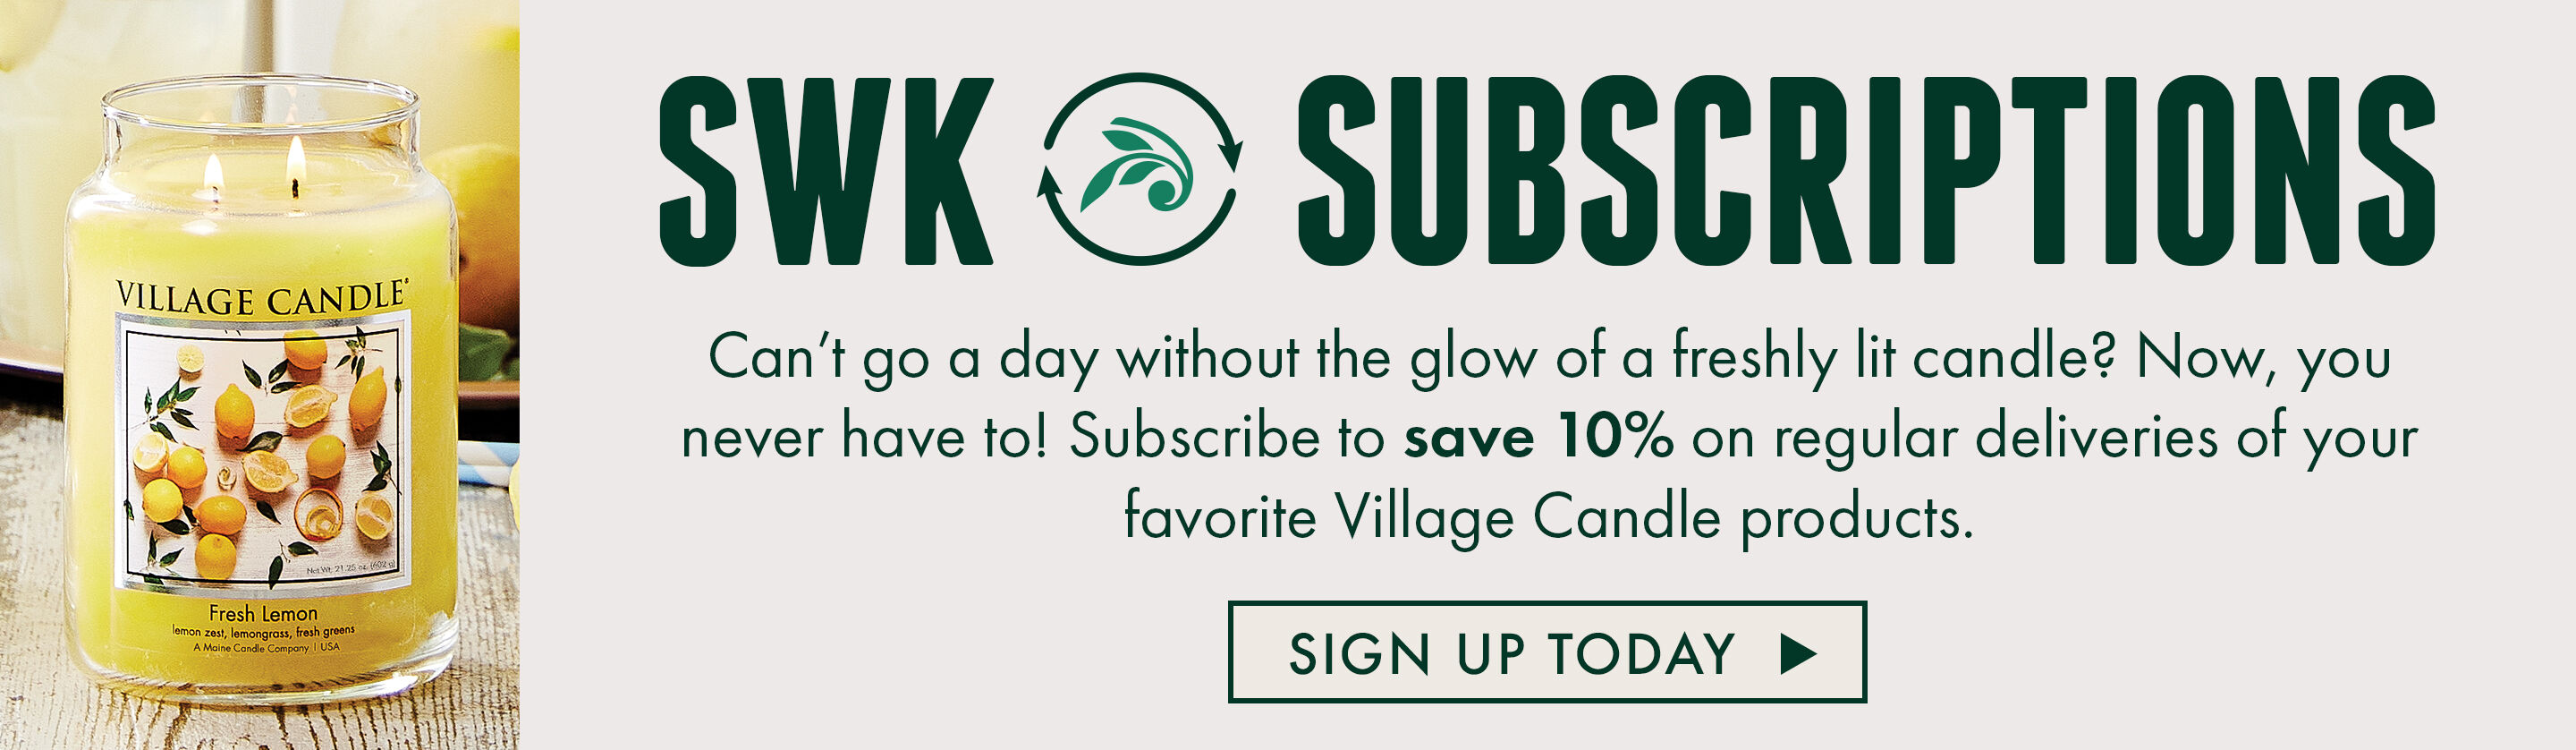 SWK Subscriptions - Sign Up Today